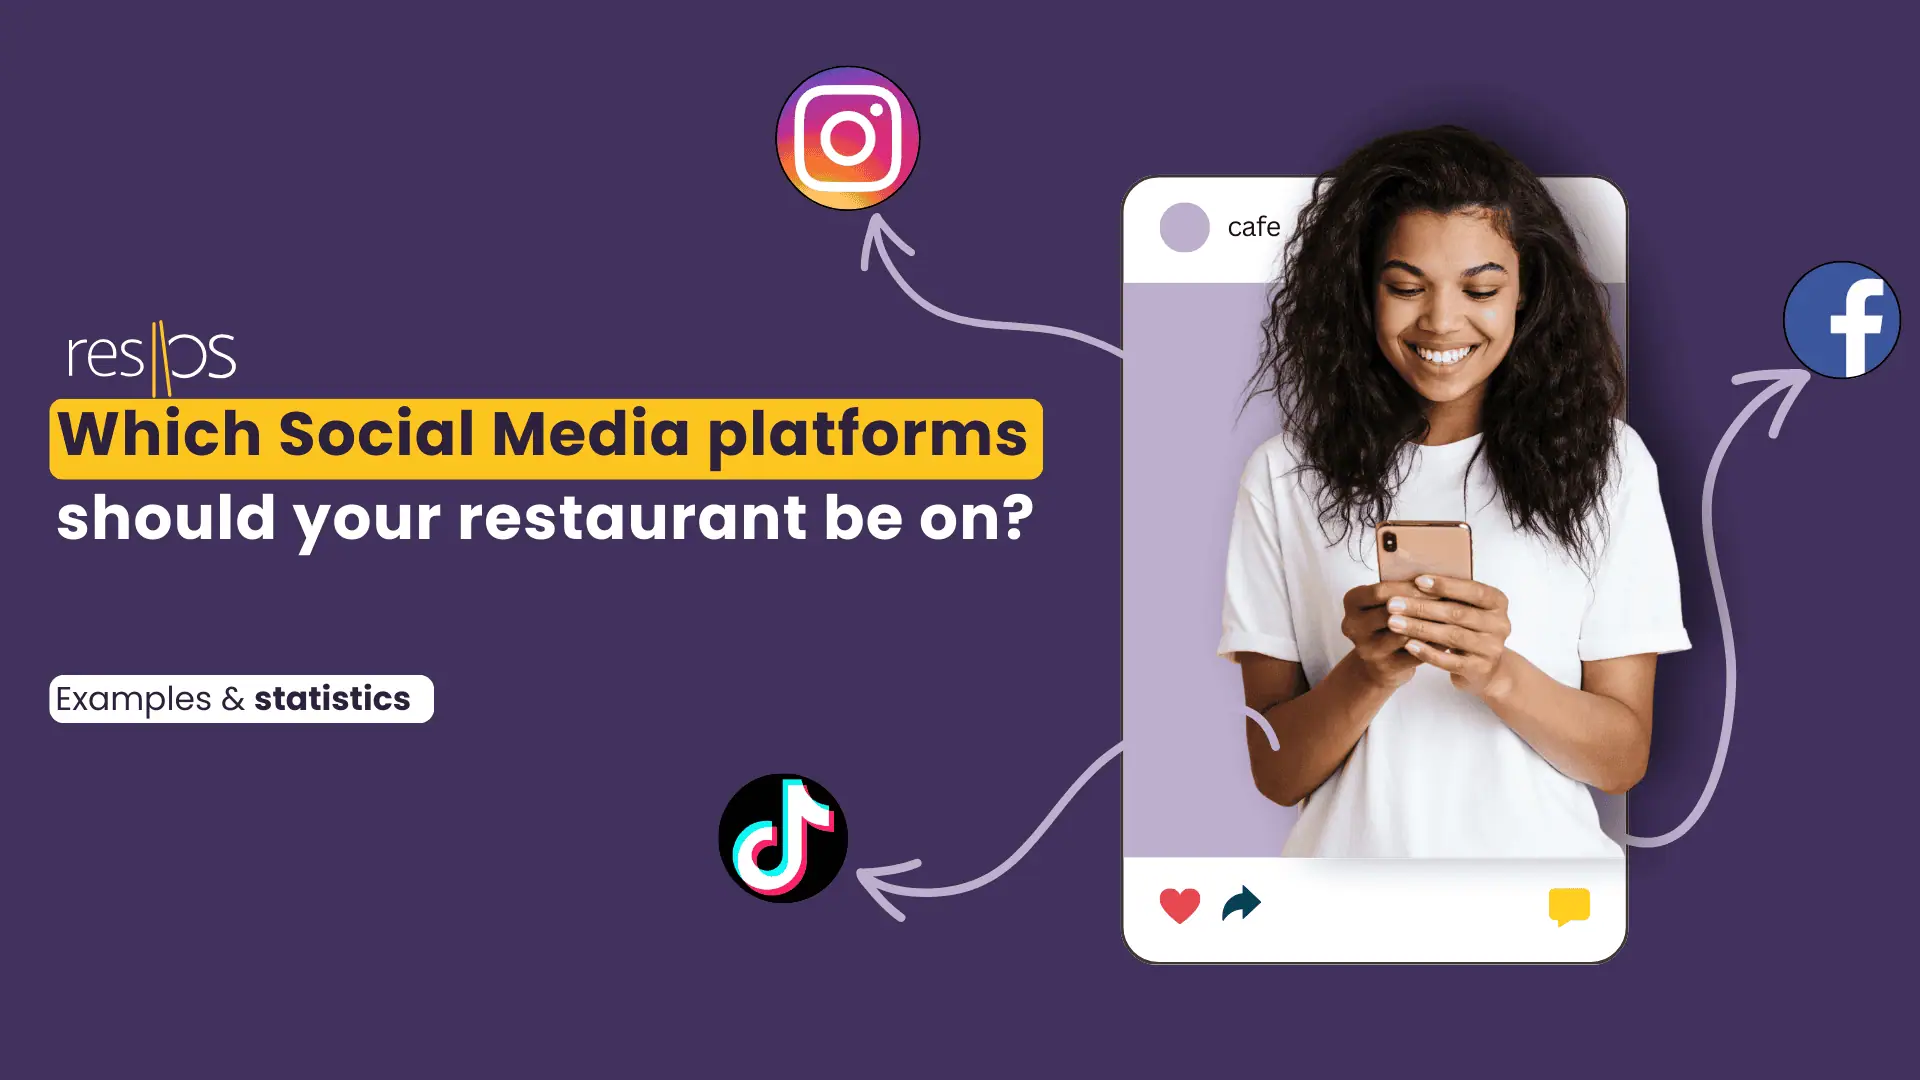 Which Social Media platforms should your restaurant be on?